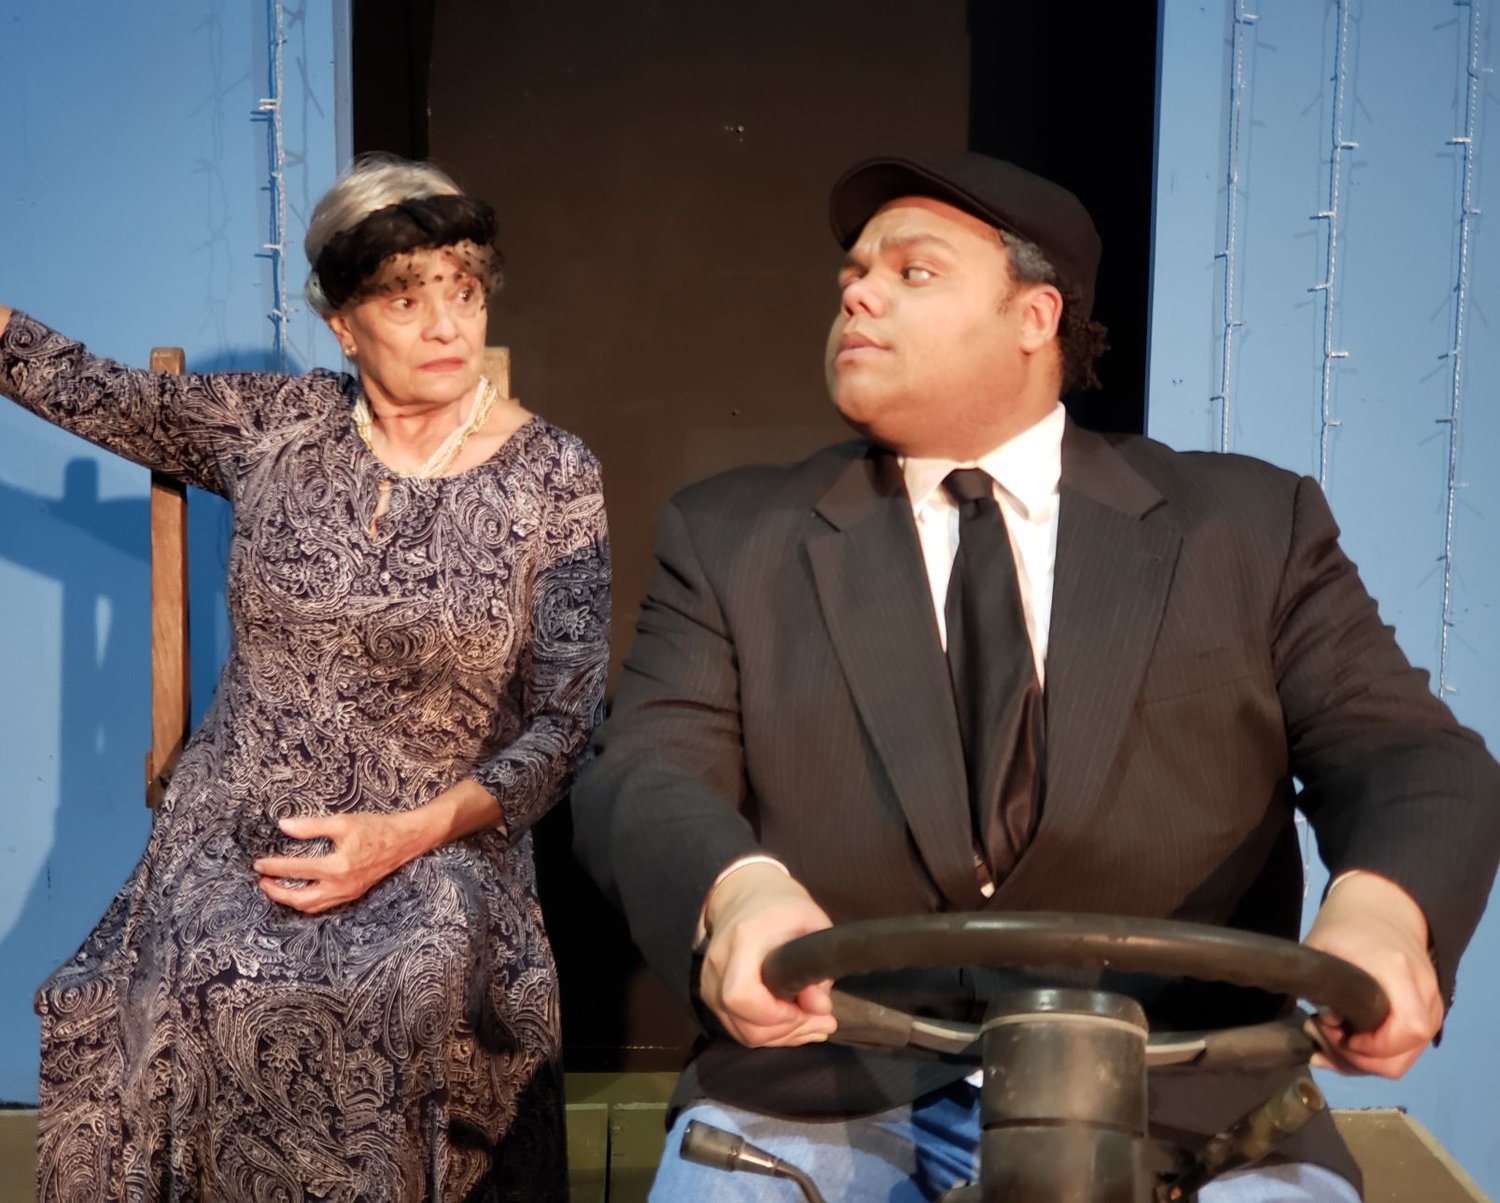 Daisy (Mary Anne Cecil) and Hoke (Bradley Lowe) have one of their many discussions in the Pulitzer Prize-winning Driving Miss Daisy running from Friday through Oct. 20 at Myers Dinner Theatre in Hillsboro.